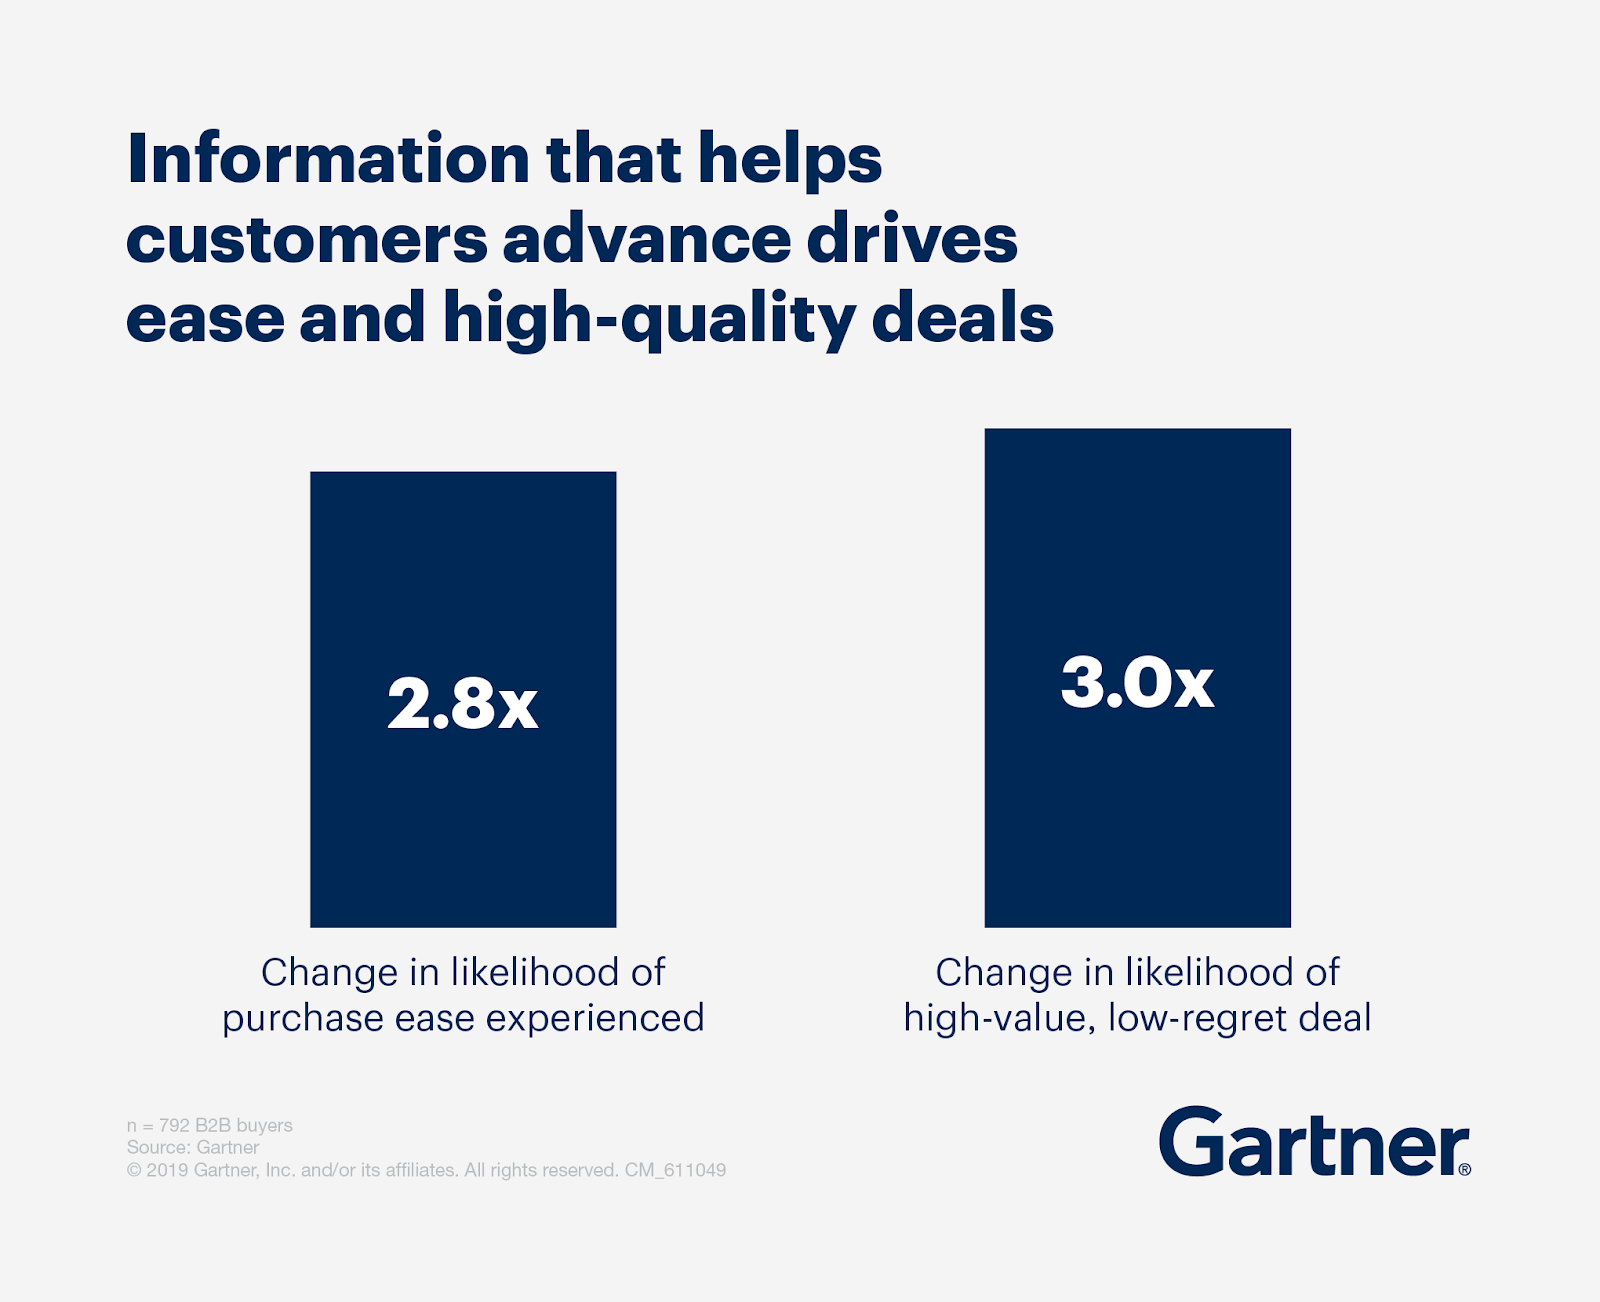 Gartner's data on how information plays a key role in closing deals